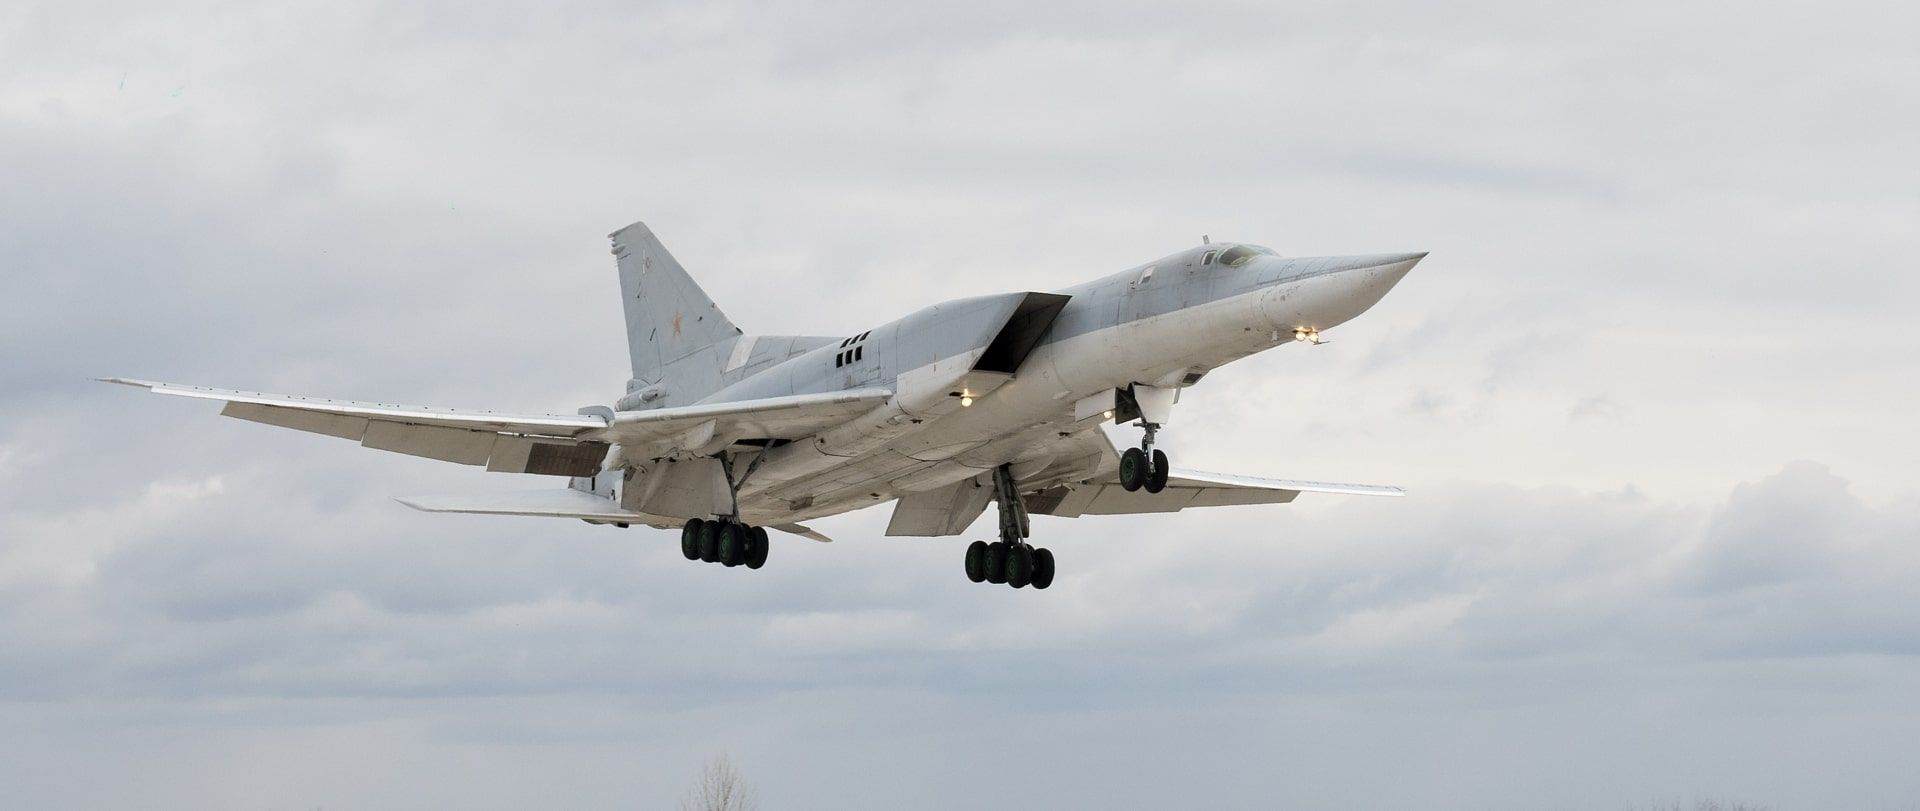 Russia has officially confirmed that a Ukrainian Tu-141 drone modified into a missile, damaged 3 Tu-22M3 strategic bomber-missile carriers